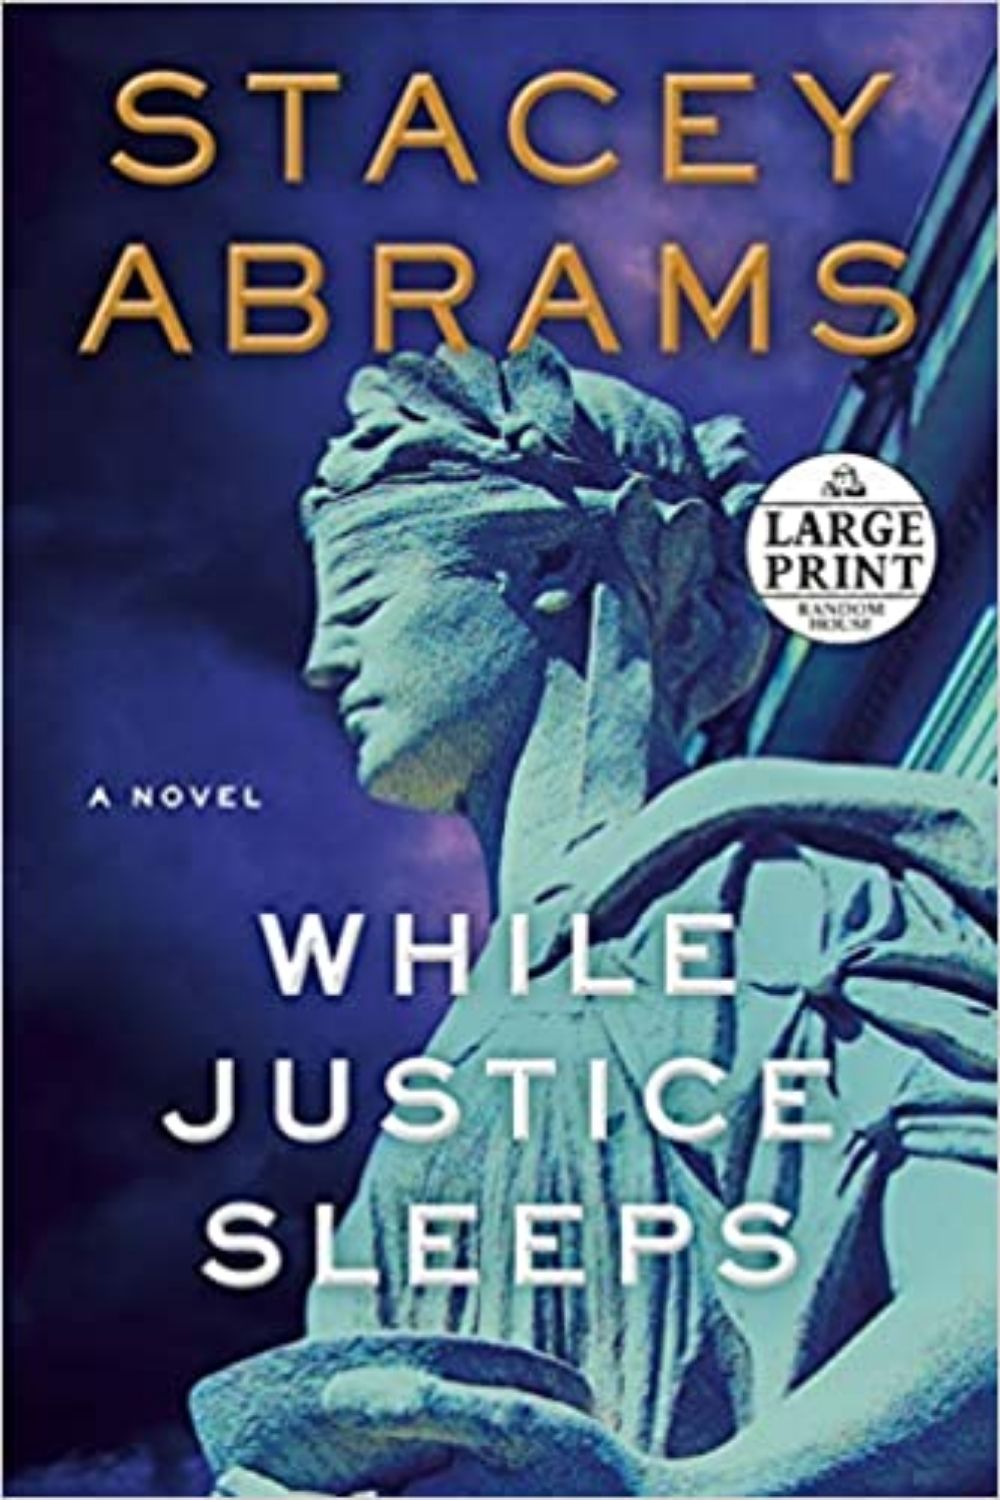 While Justice Sleeps By Stacey Abrams | Clever And Complex Legal Thriller Novel